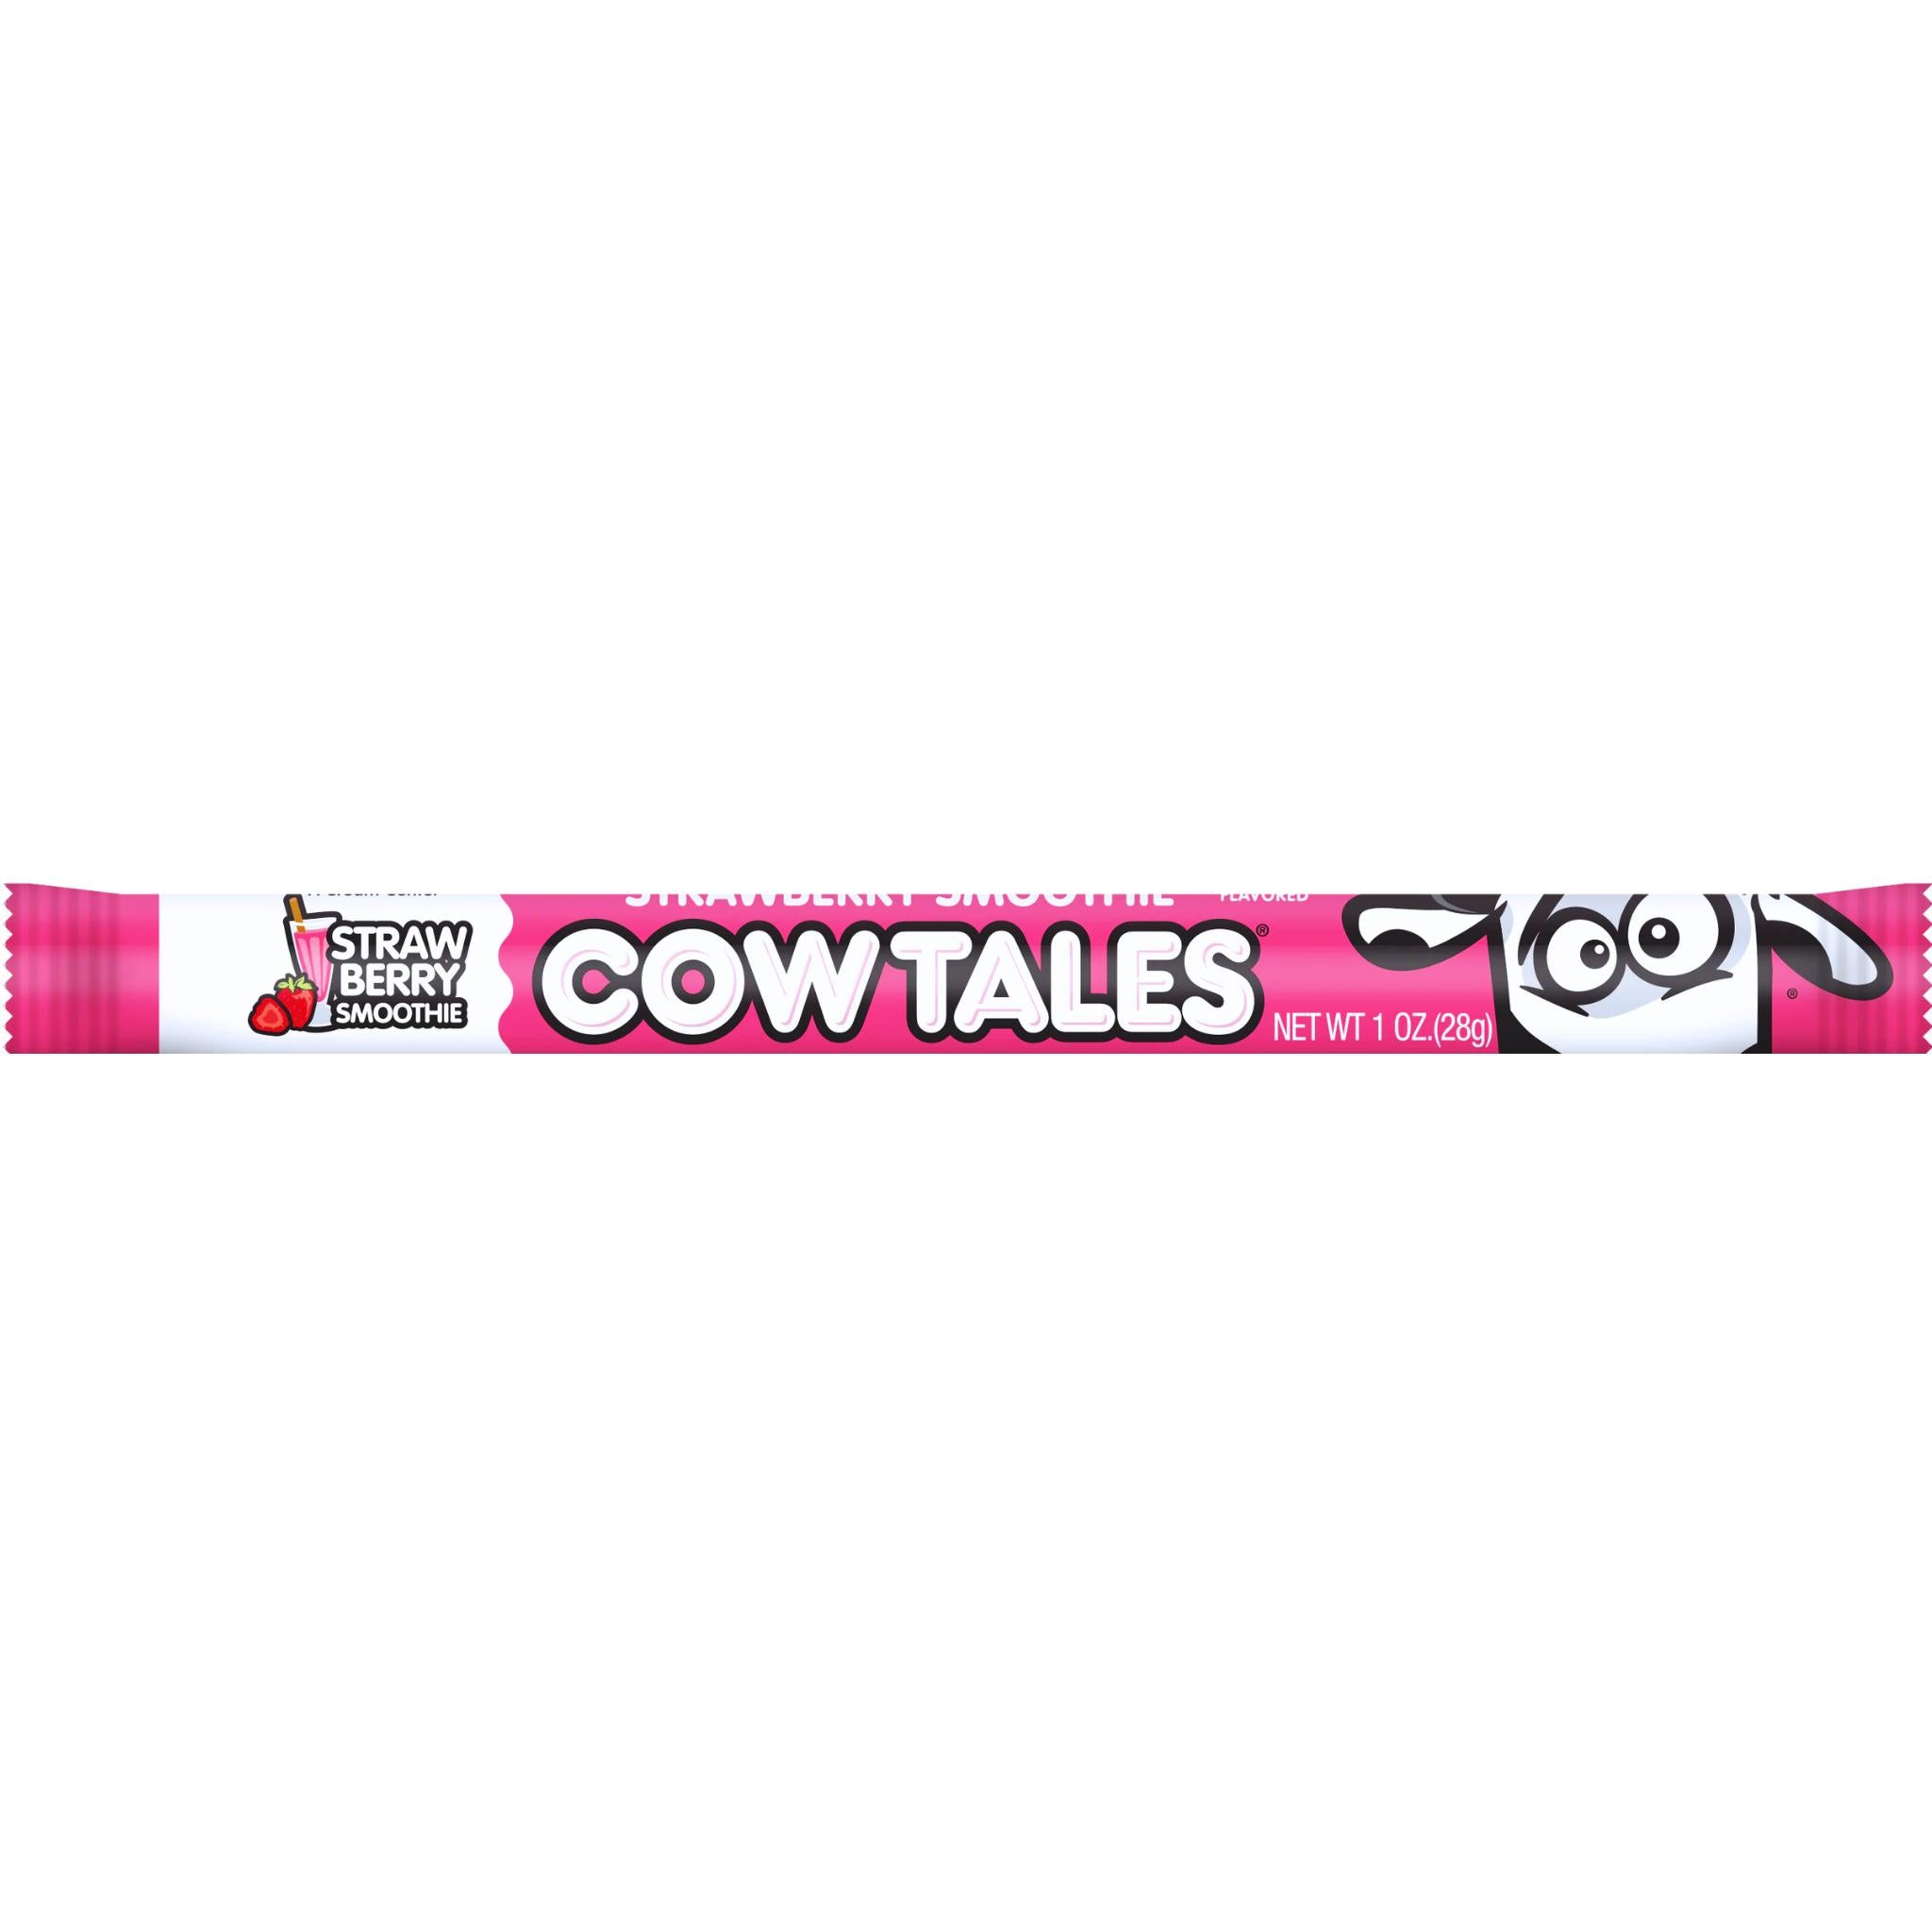 Goetze's Strawberry Smoothie Cow Tales - 28g